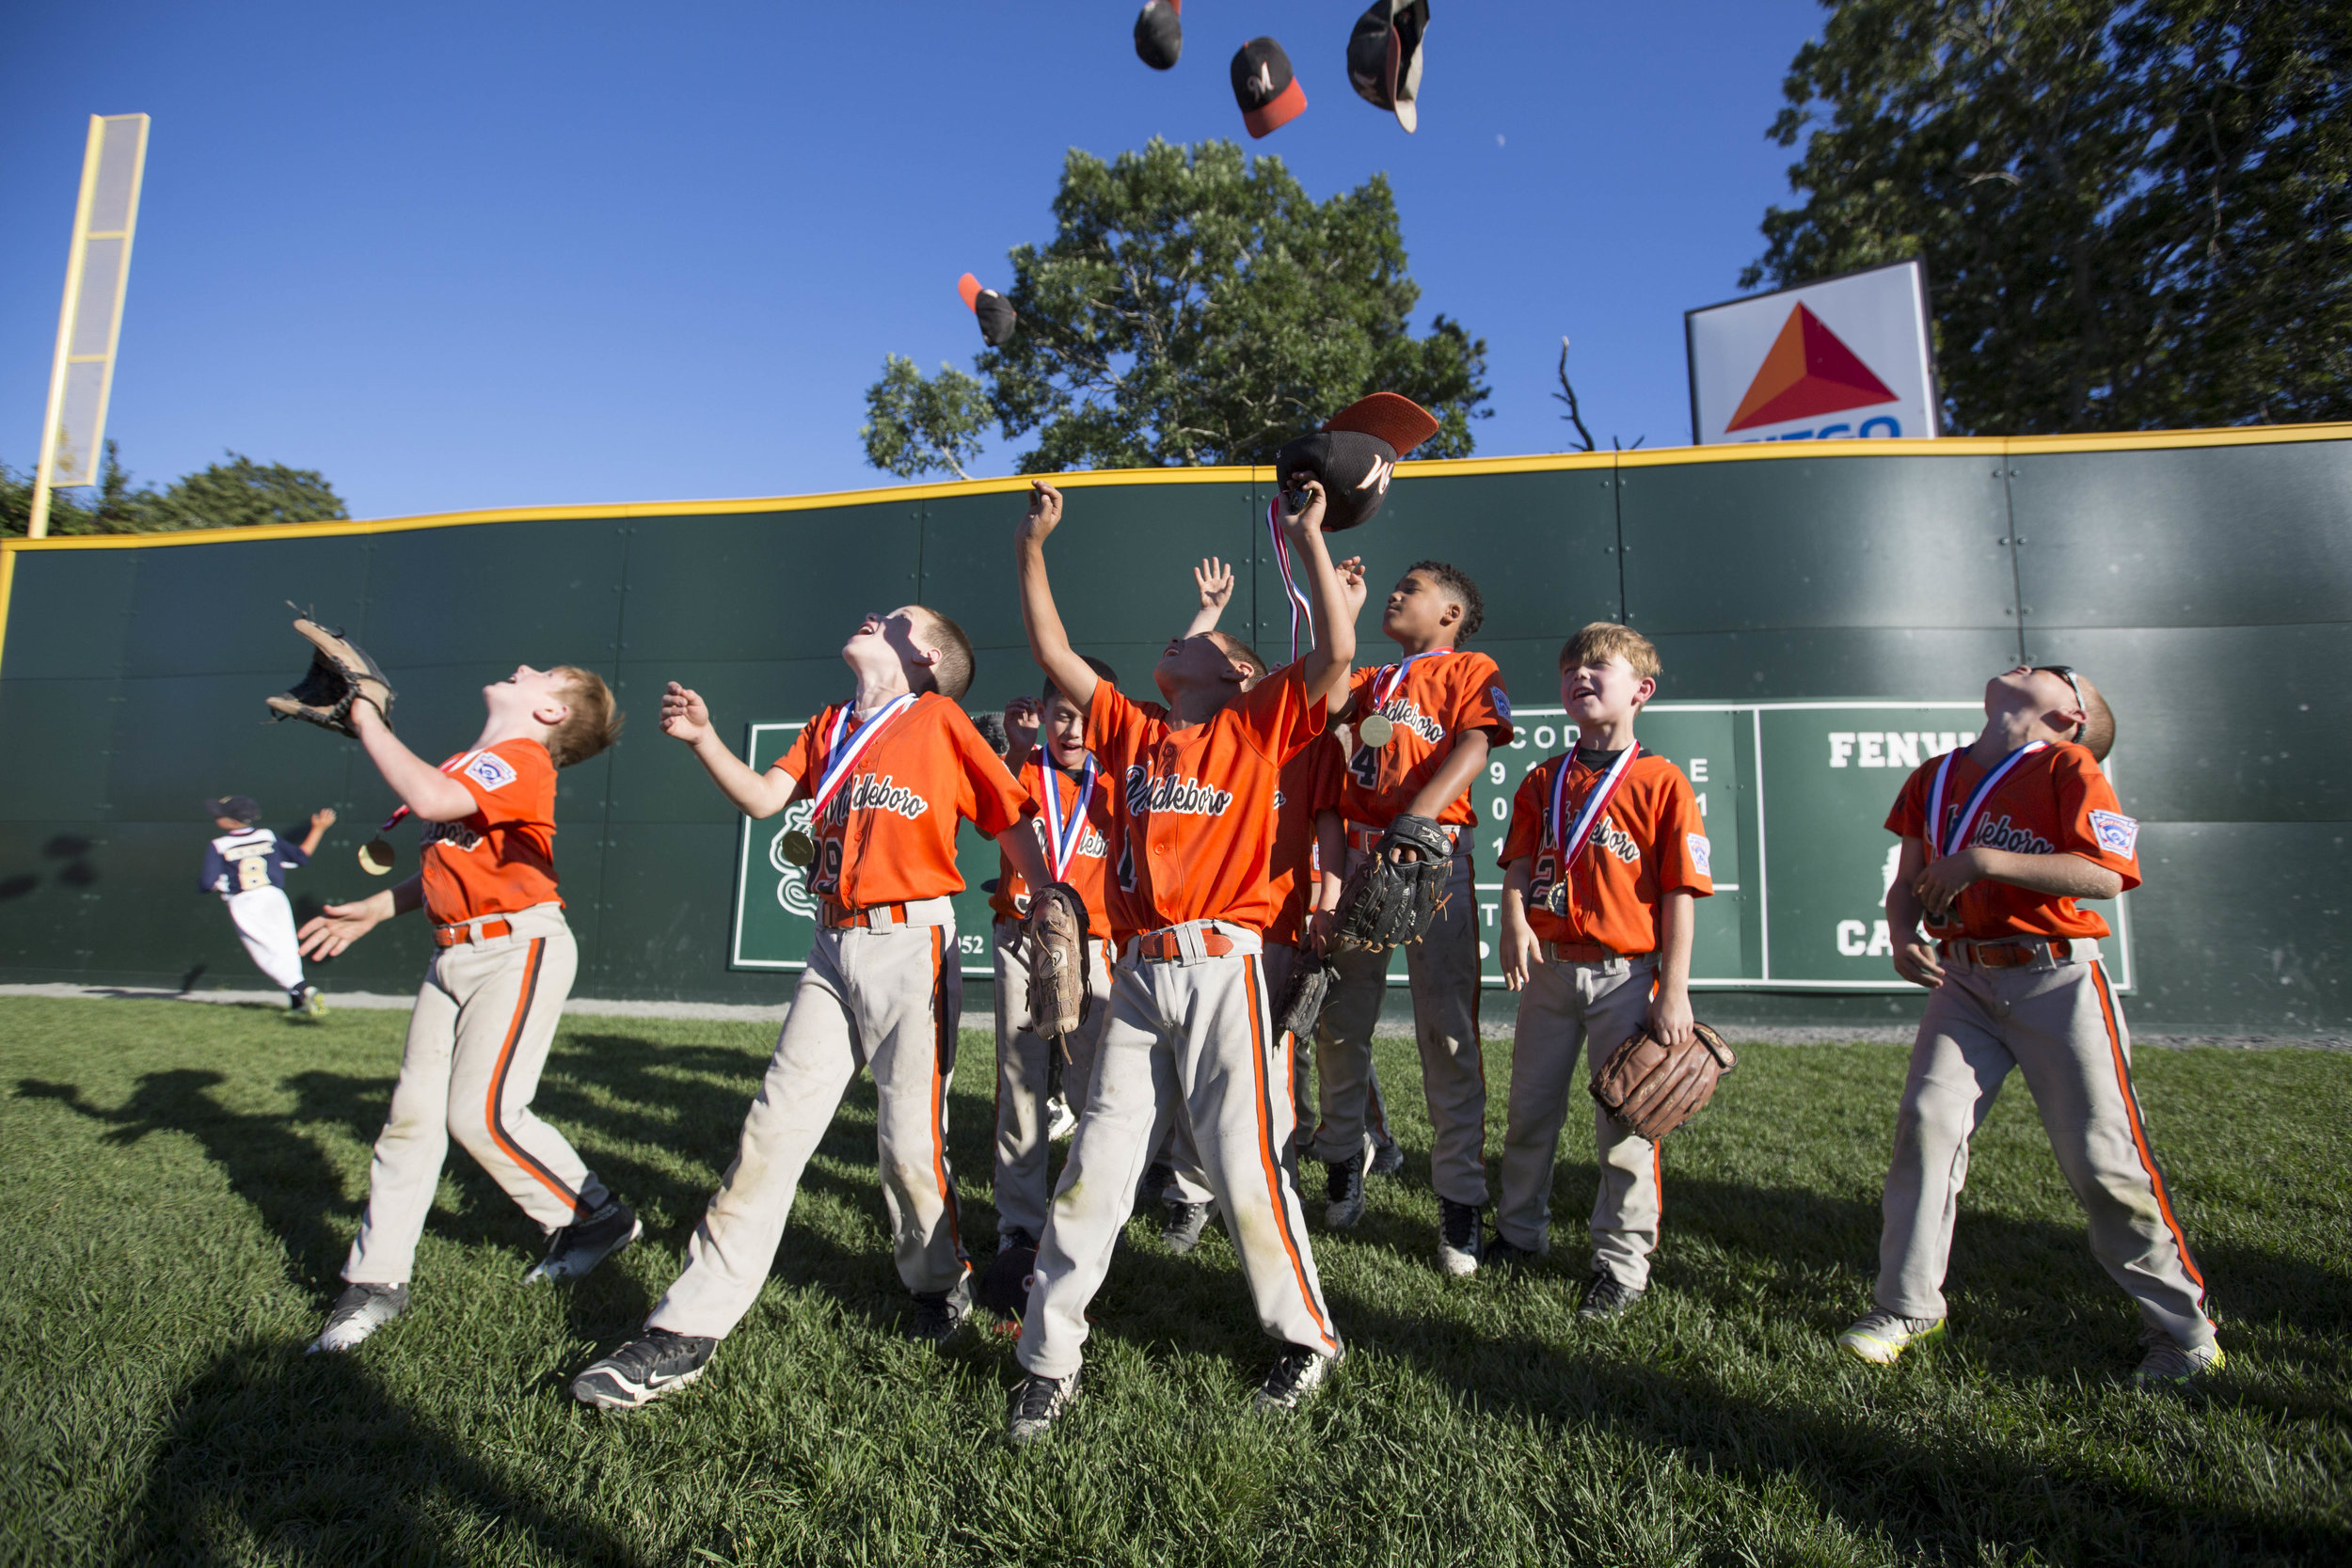  Middleboro celebrates their win over East Bridgewater in the championship game in the under-8 Jimmy Fund Little League Tournament on July 30, 2017. 